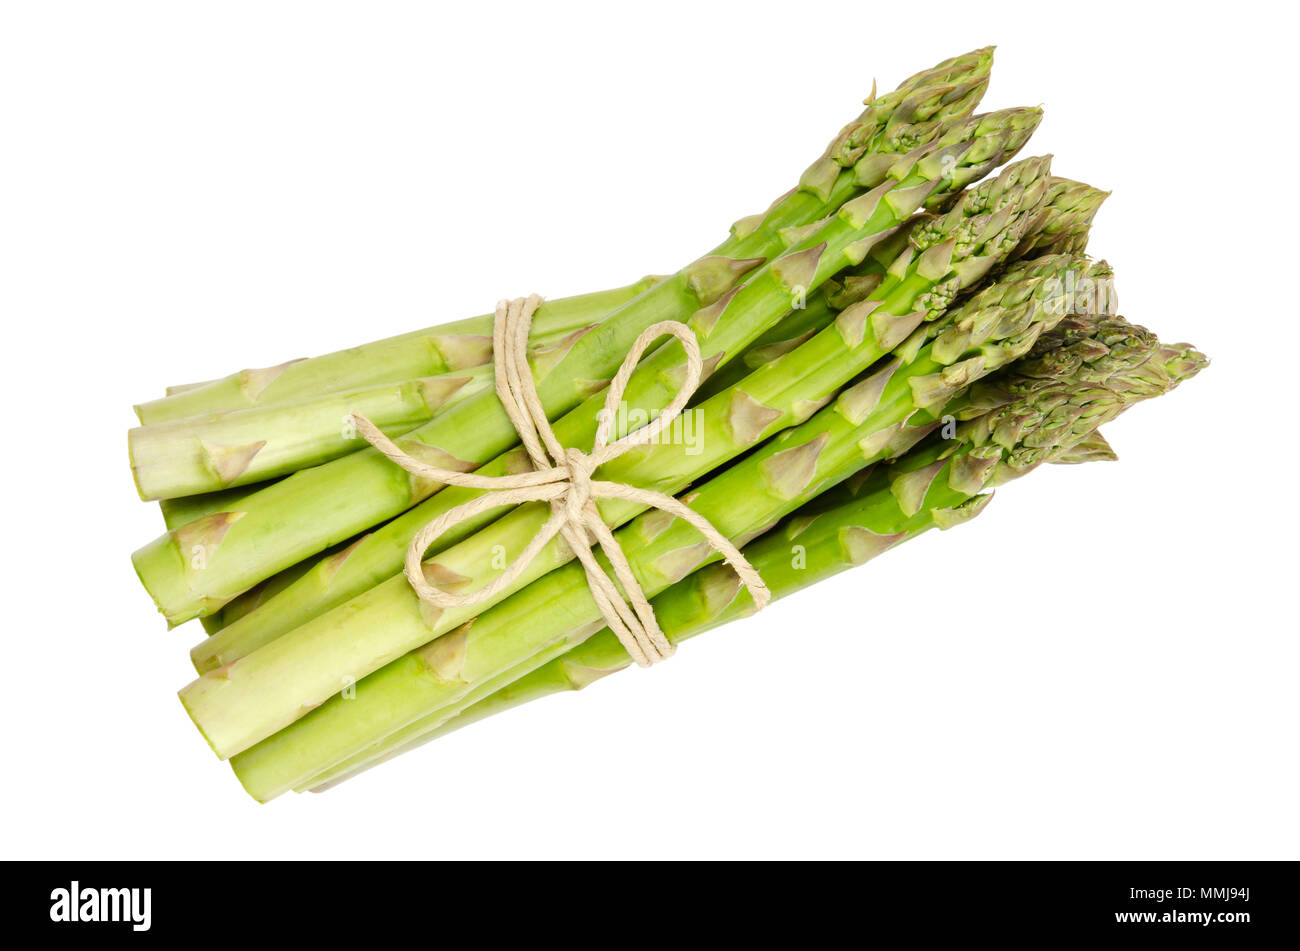 Bundle of fresh green asparagus shoots, also sparrow grass. Cultivated Asparagus officinalis. Spring vegetable with thick stems and closed buds. Stock Photo